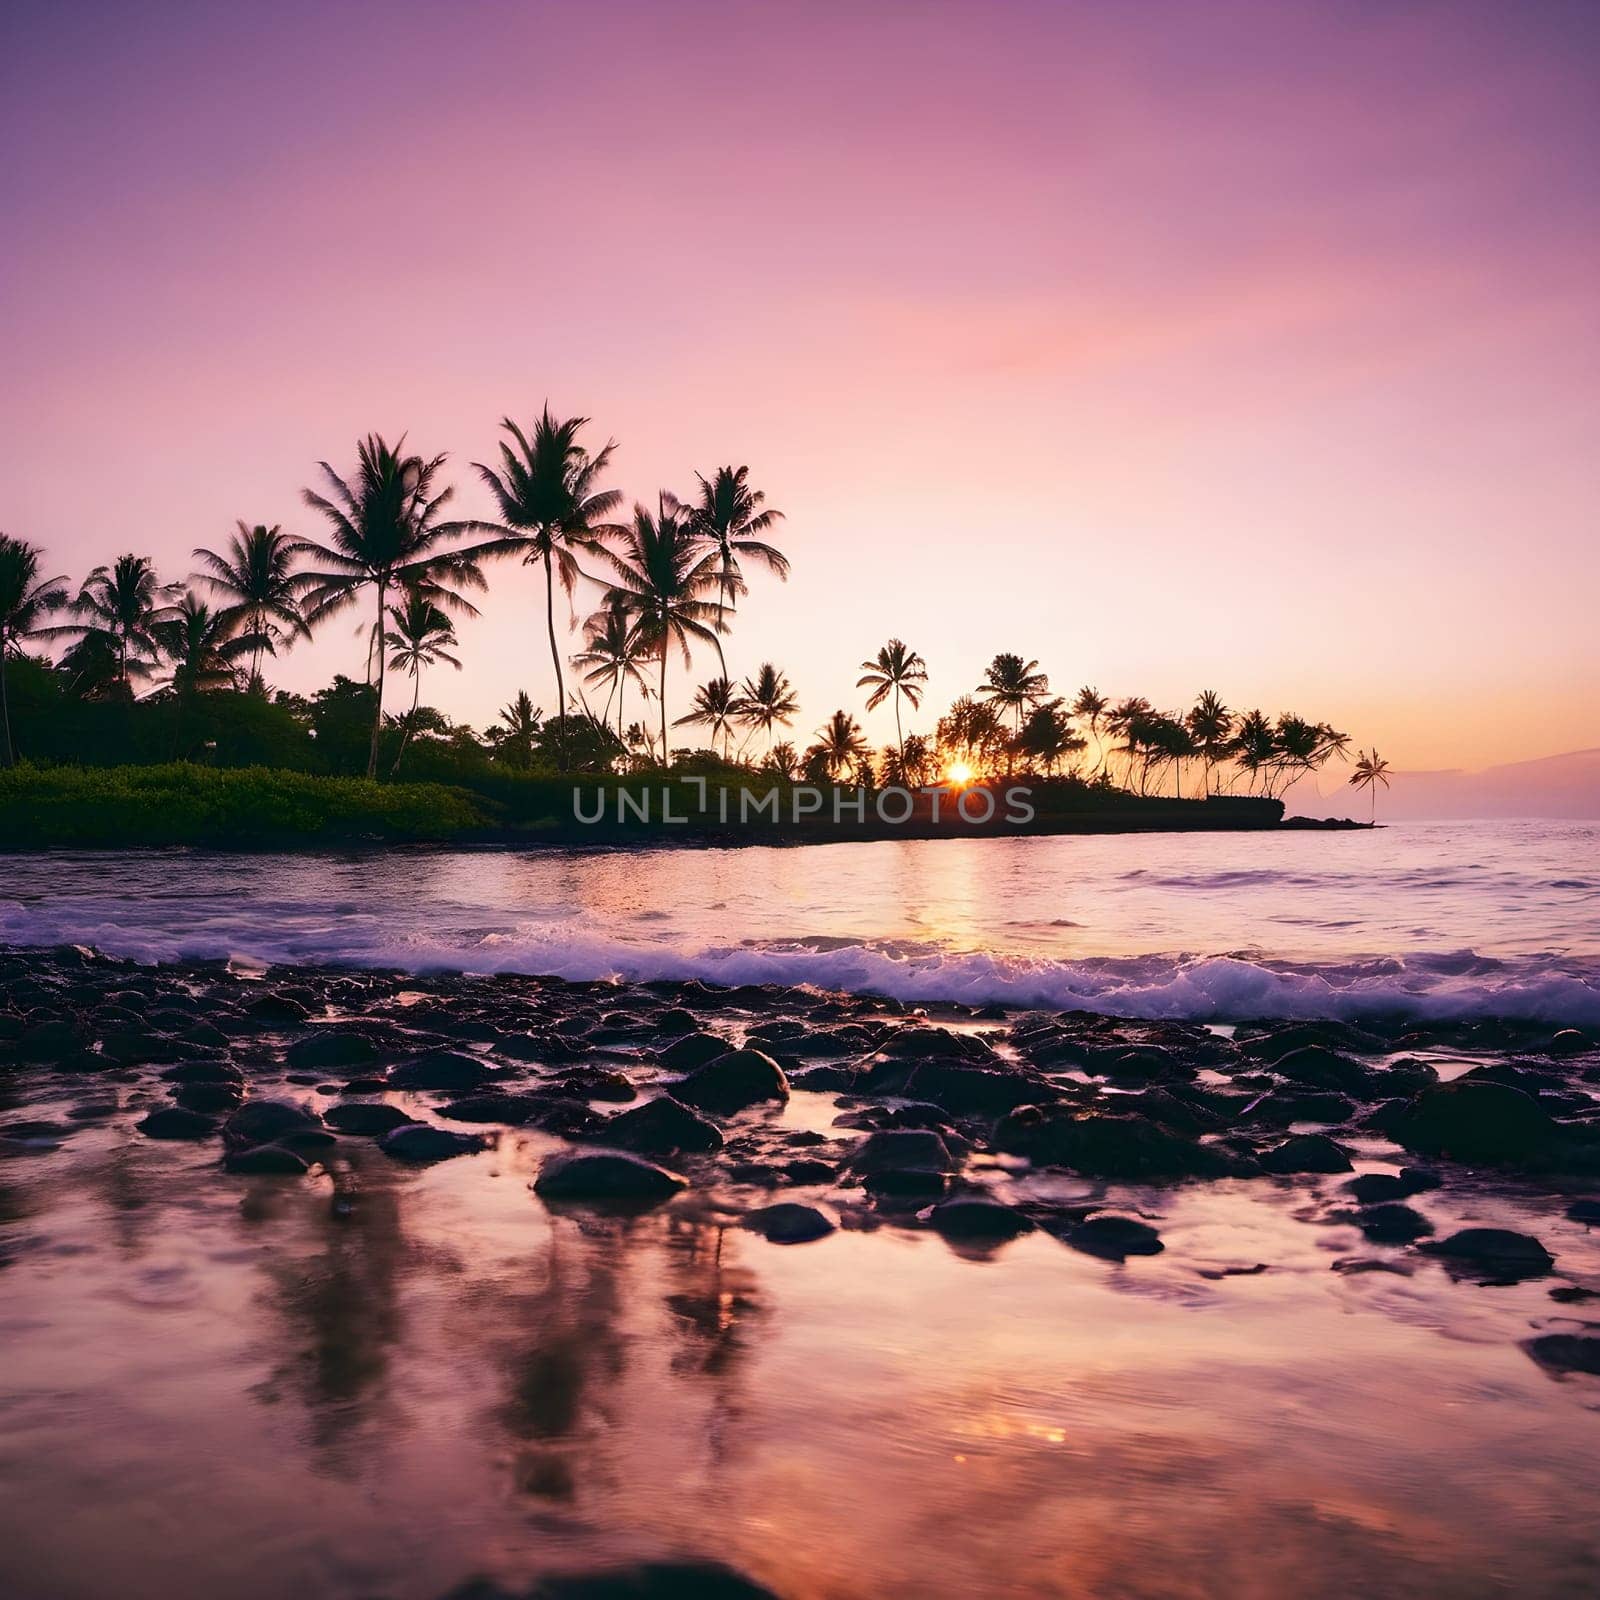 Island Dreams: Embracing the Sunset Glow on the Big Island's Tropical Shoreline